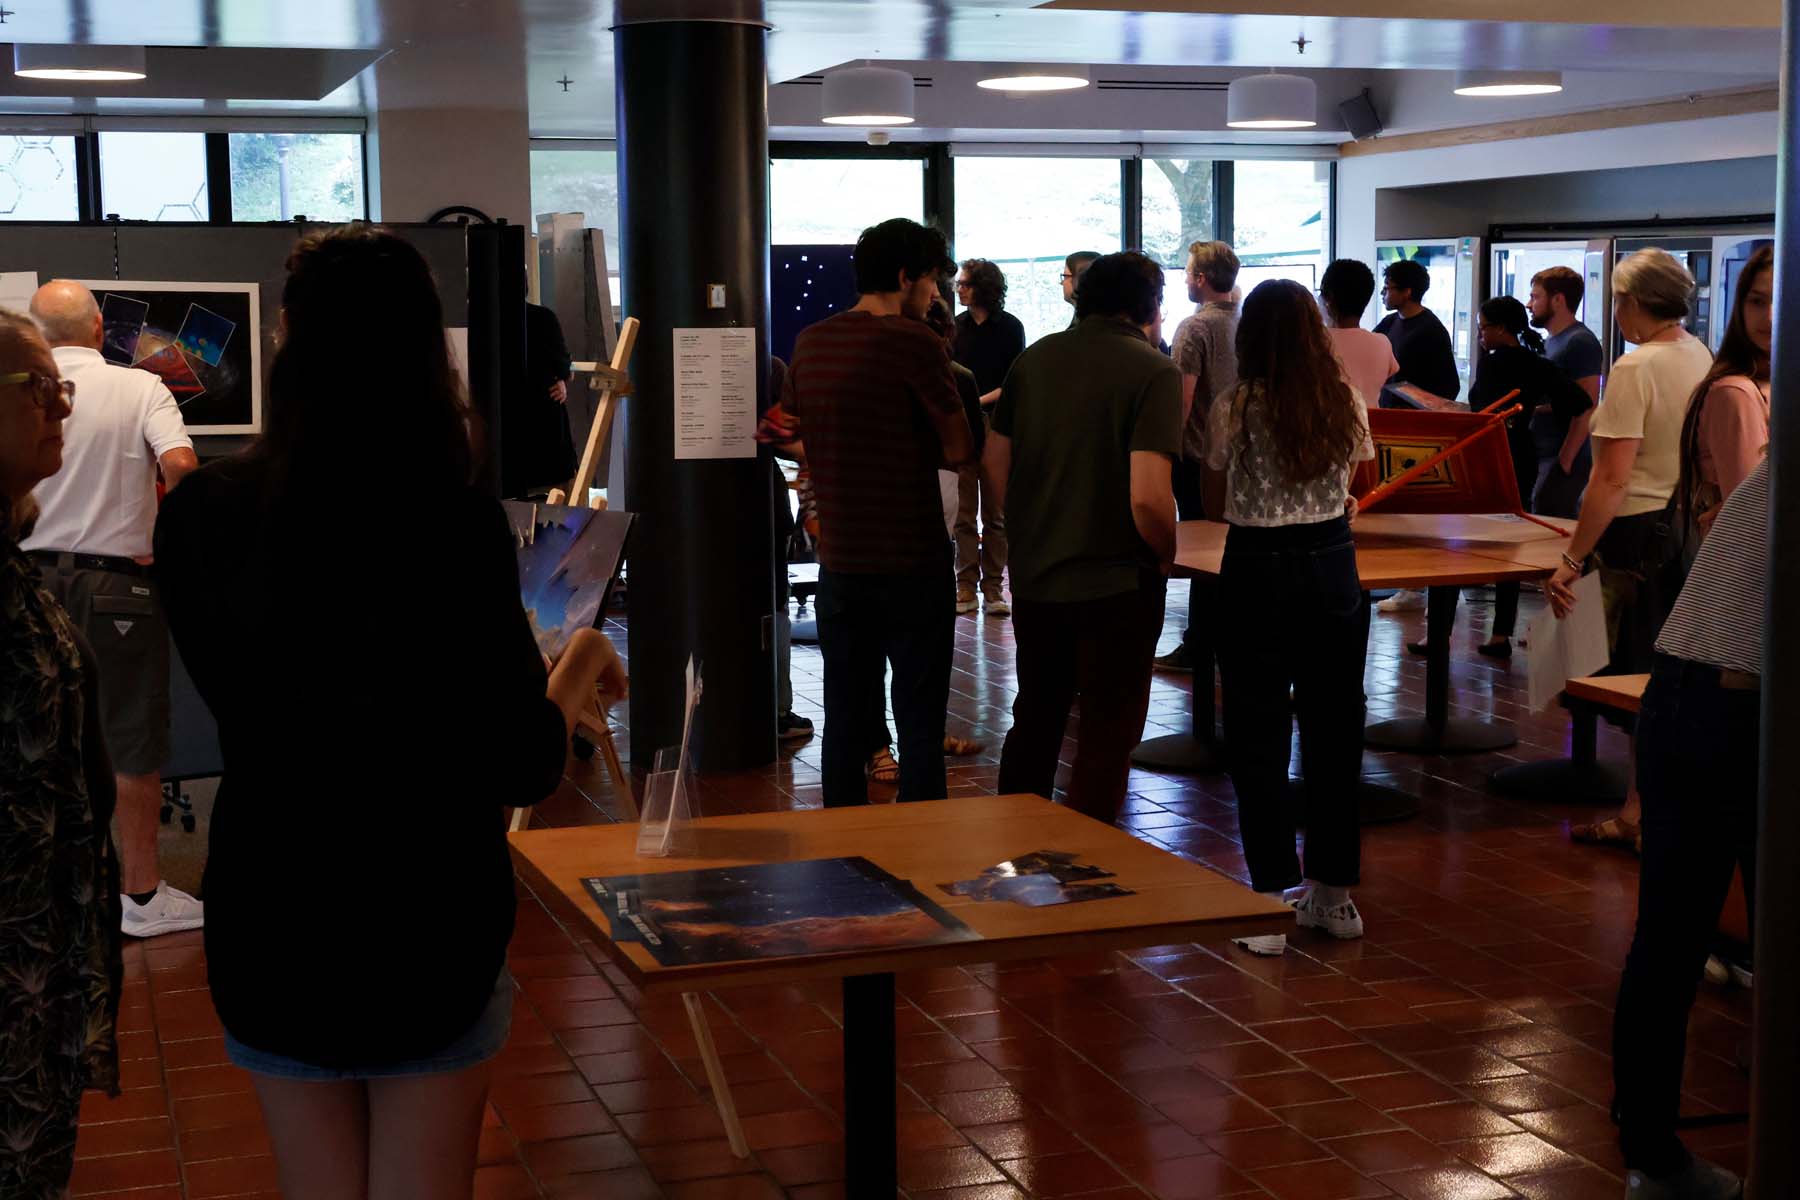 Approximately two dozen people gather around a menagerie of pieces. A centrally located table contains JWST release image posters.